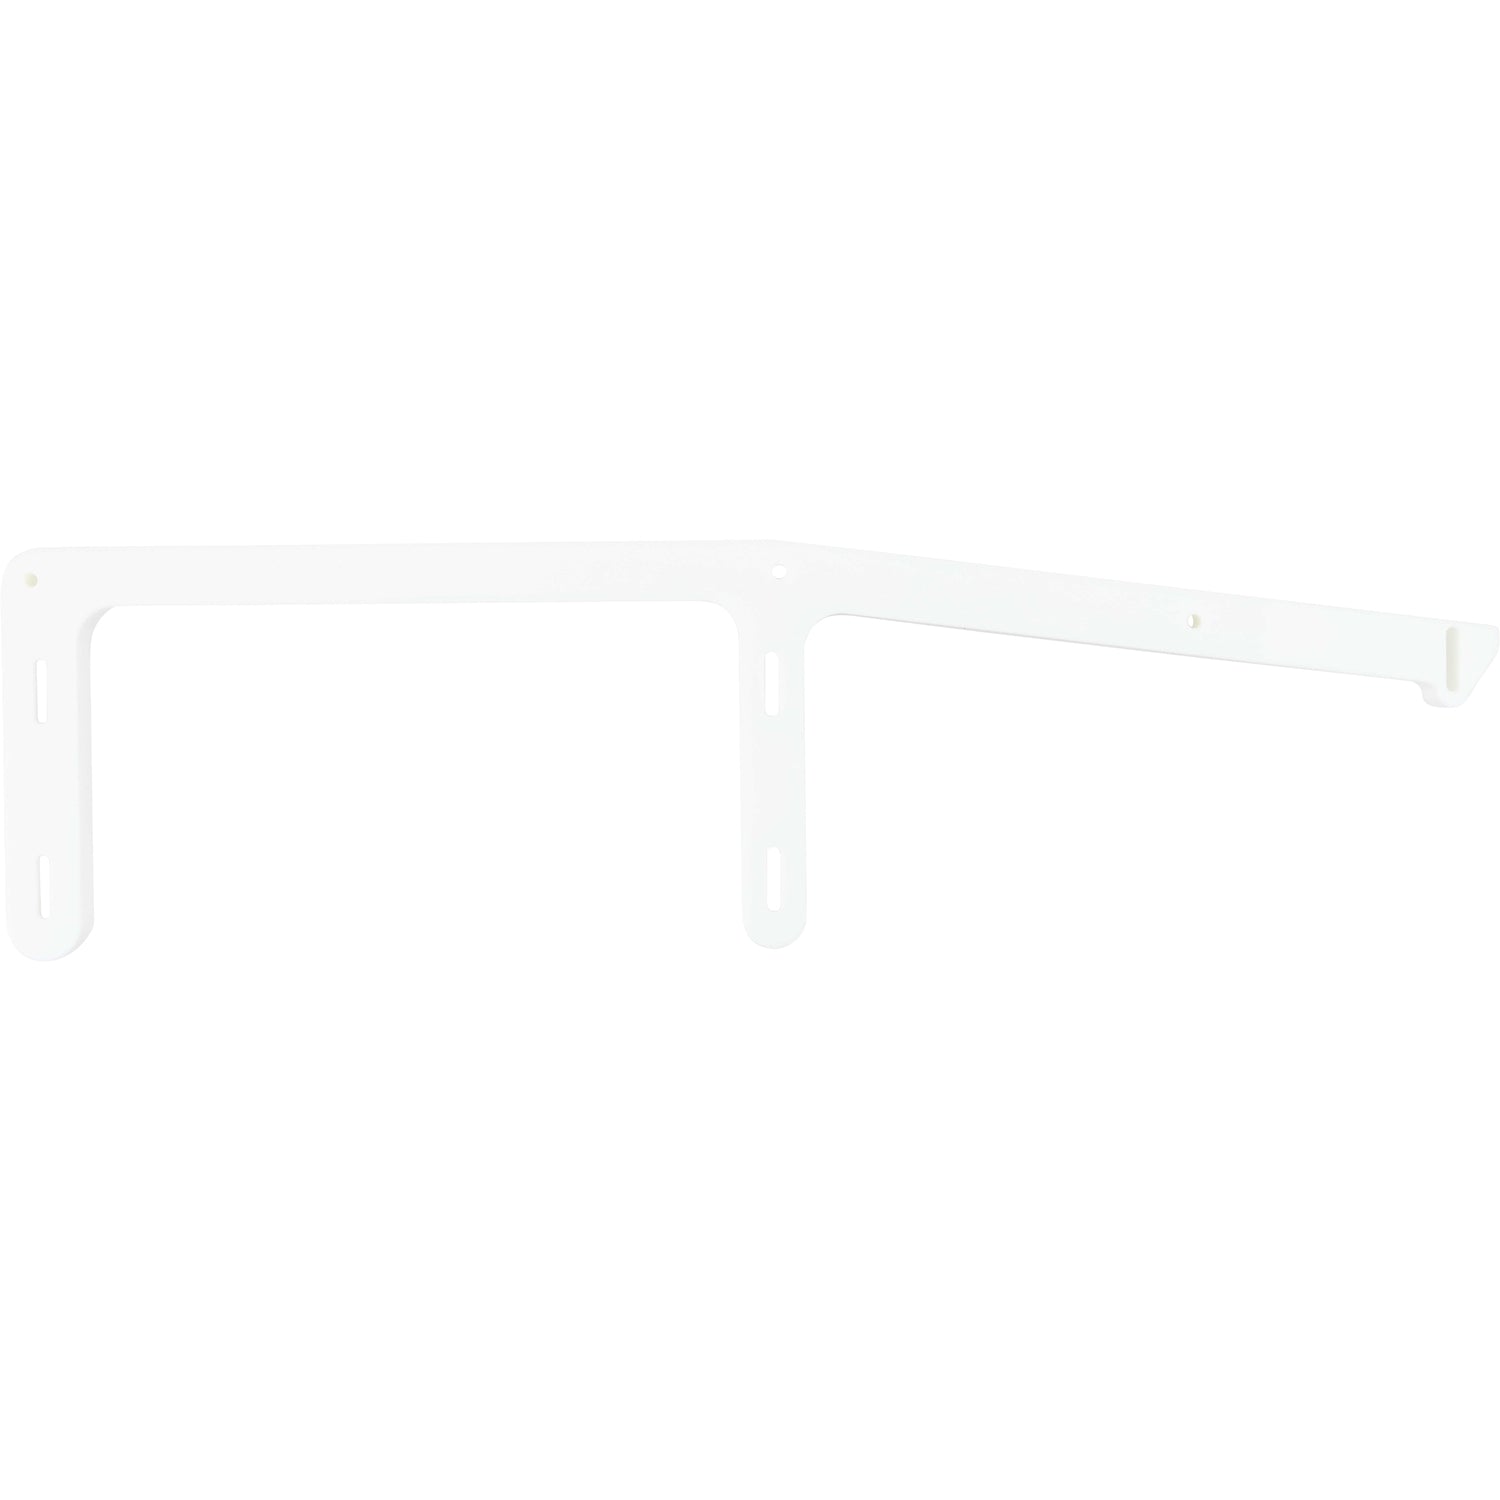 Machined white HDPE rail with three posts and holes used for mounting. Shown on white background.